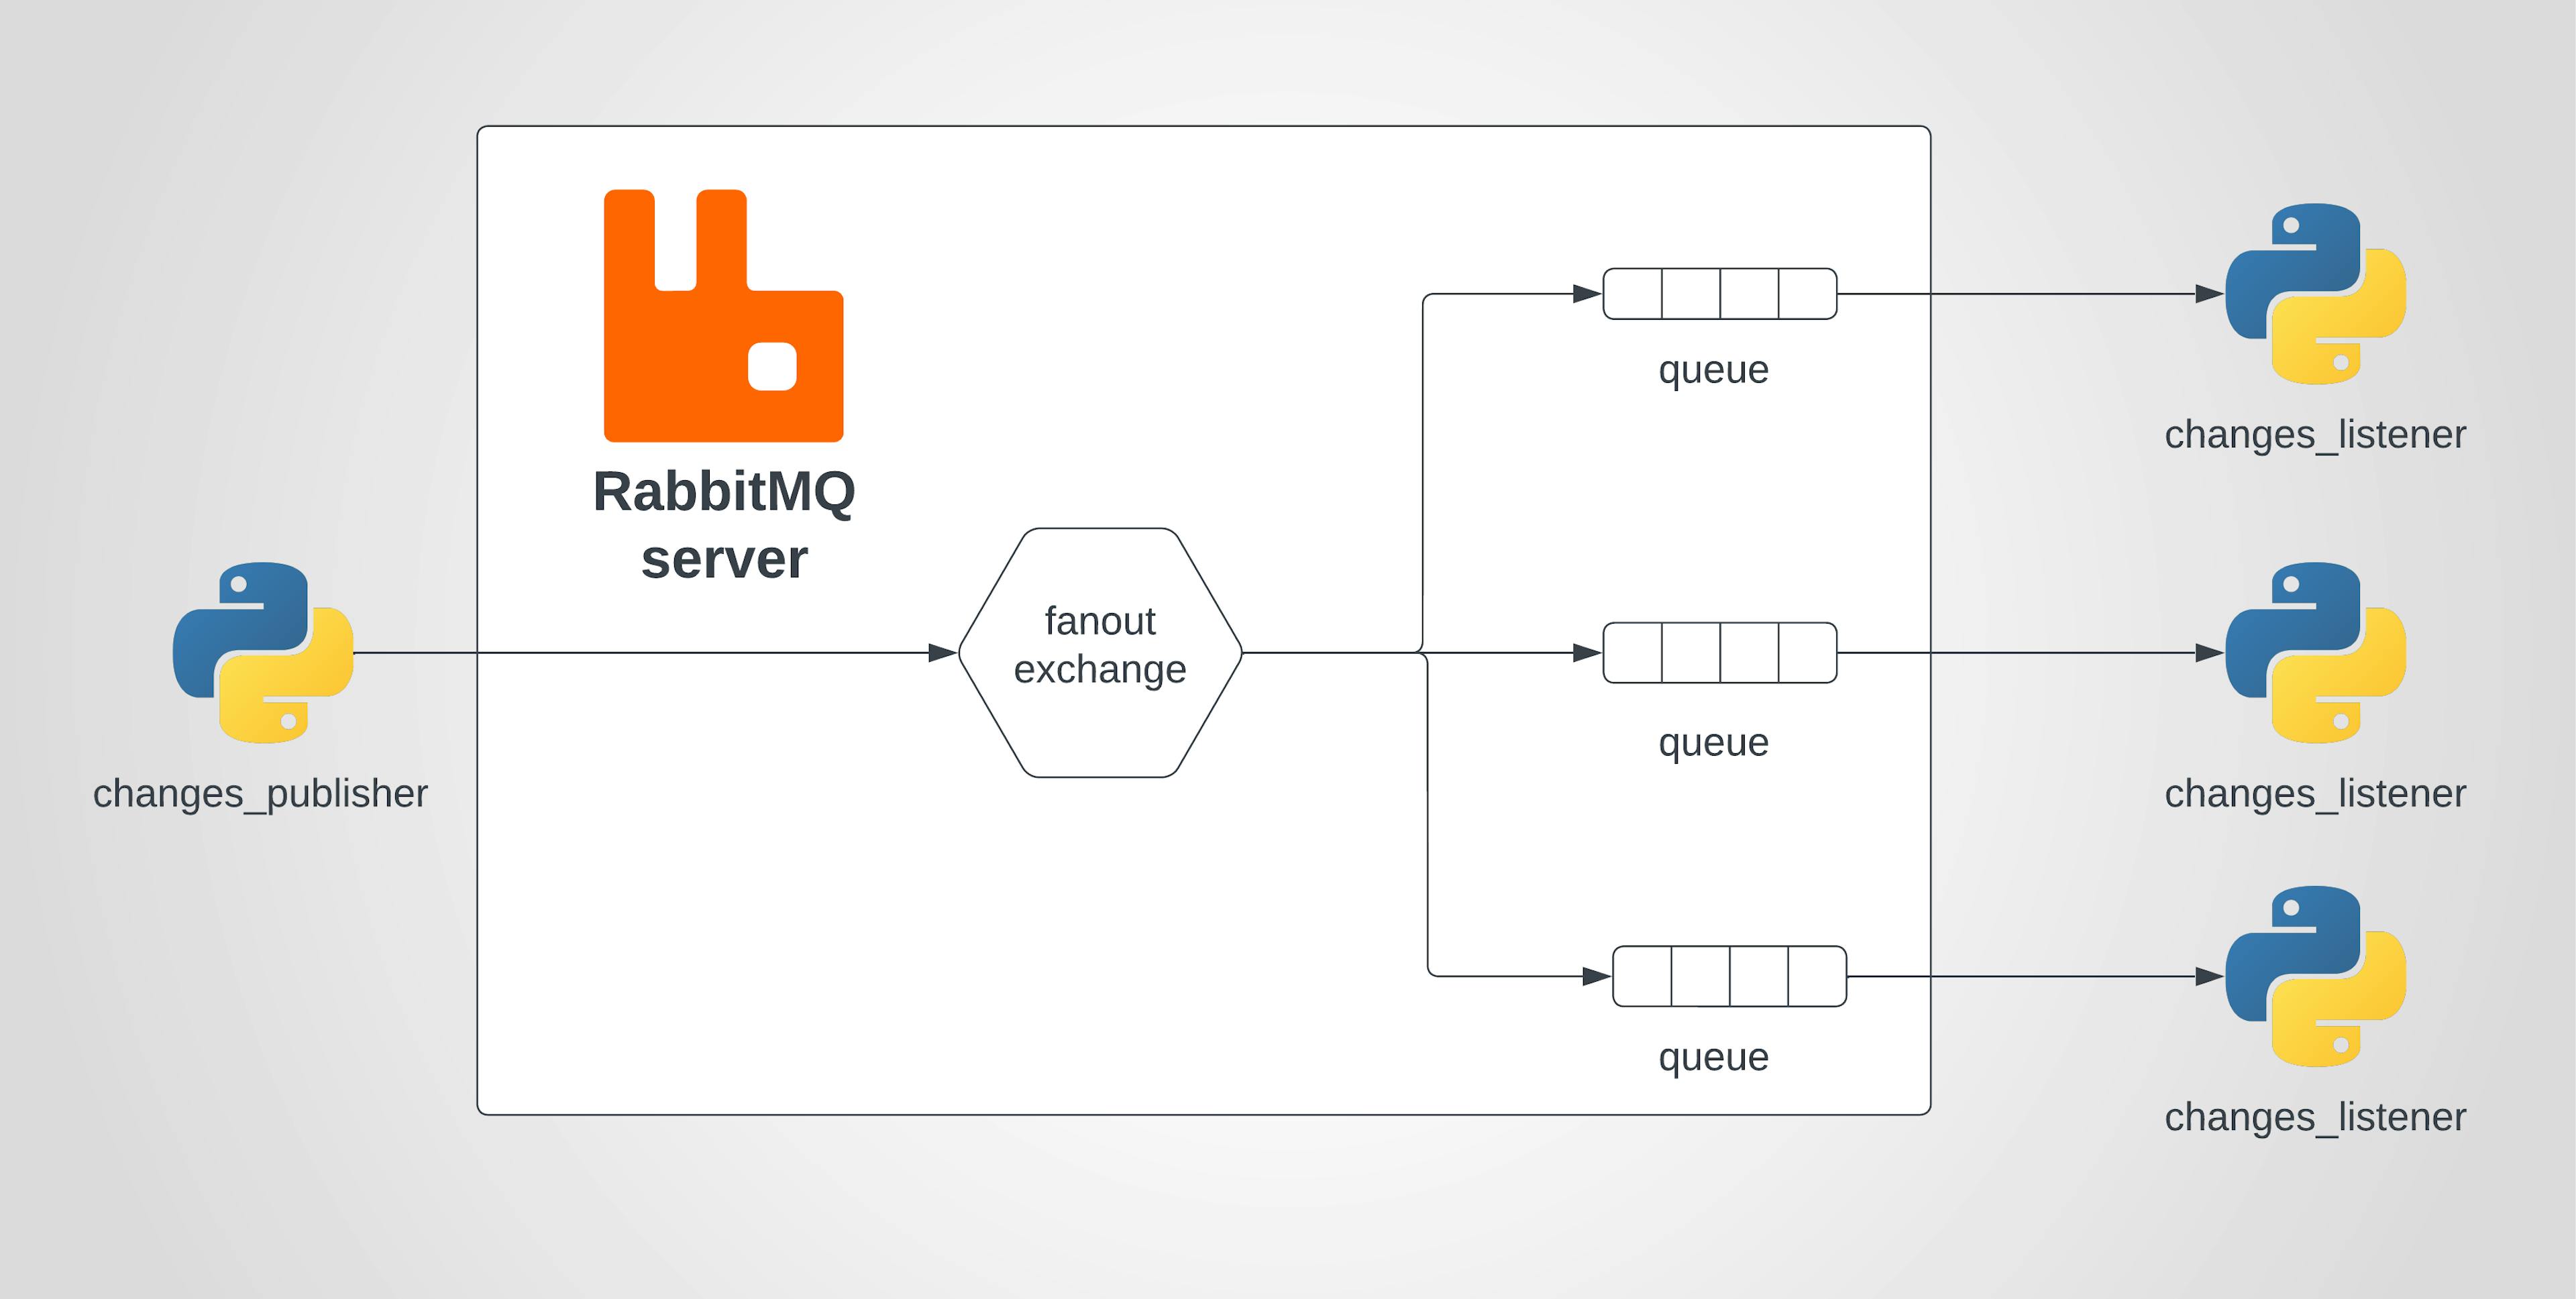 how RabbitMQ fanout exchange works